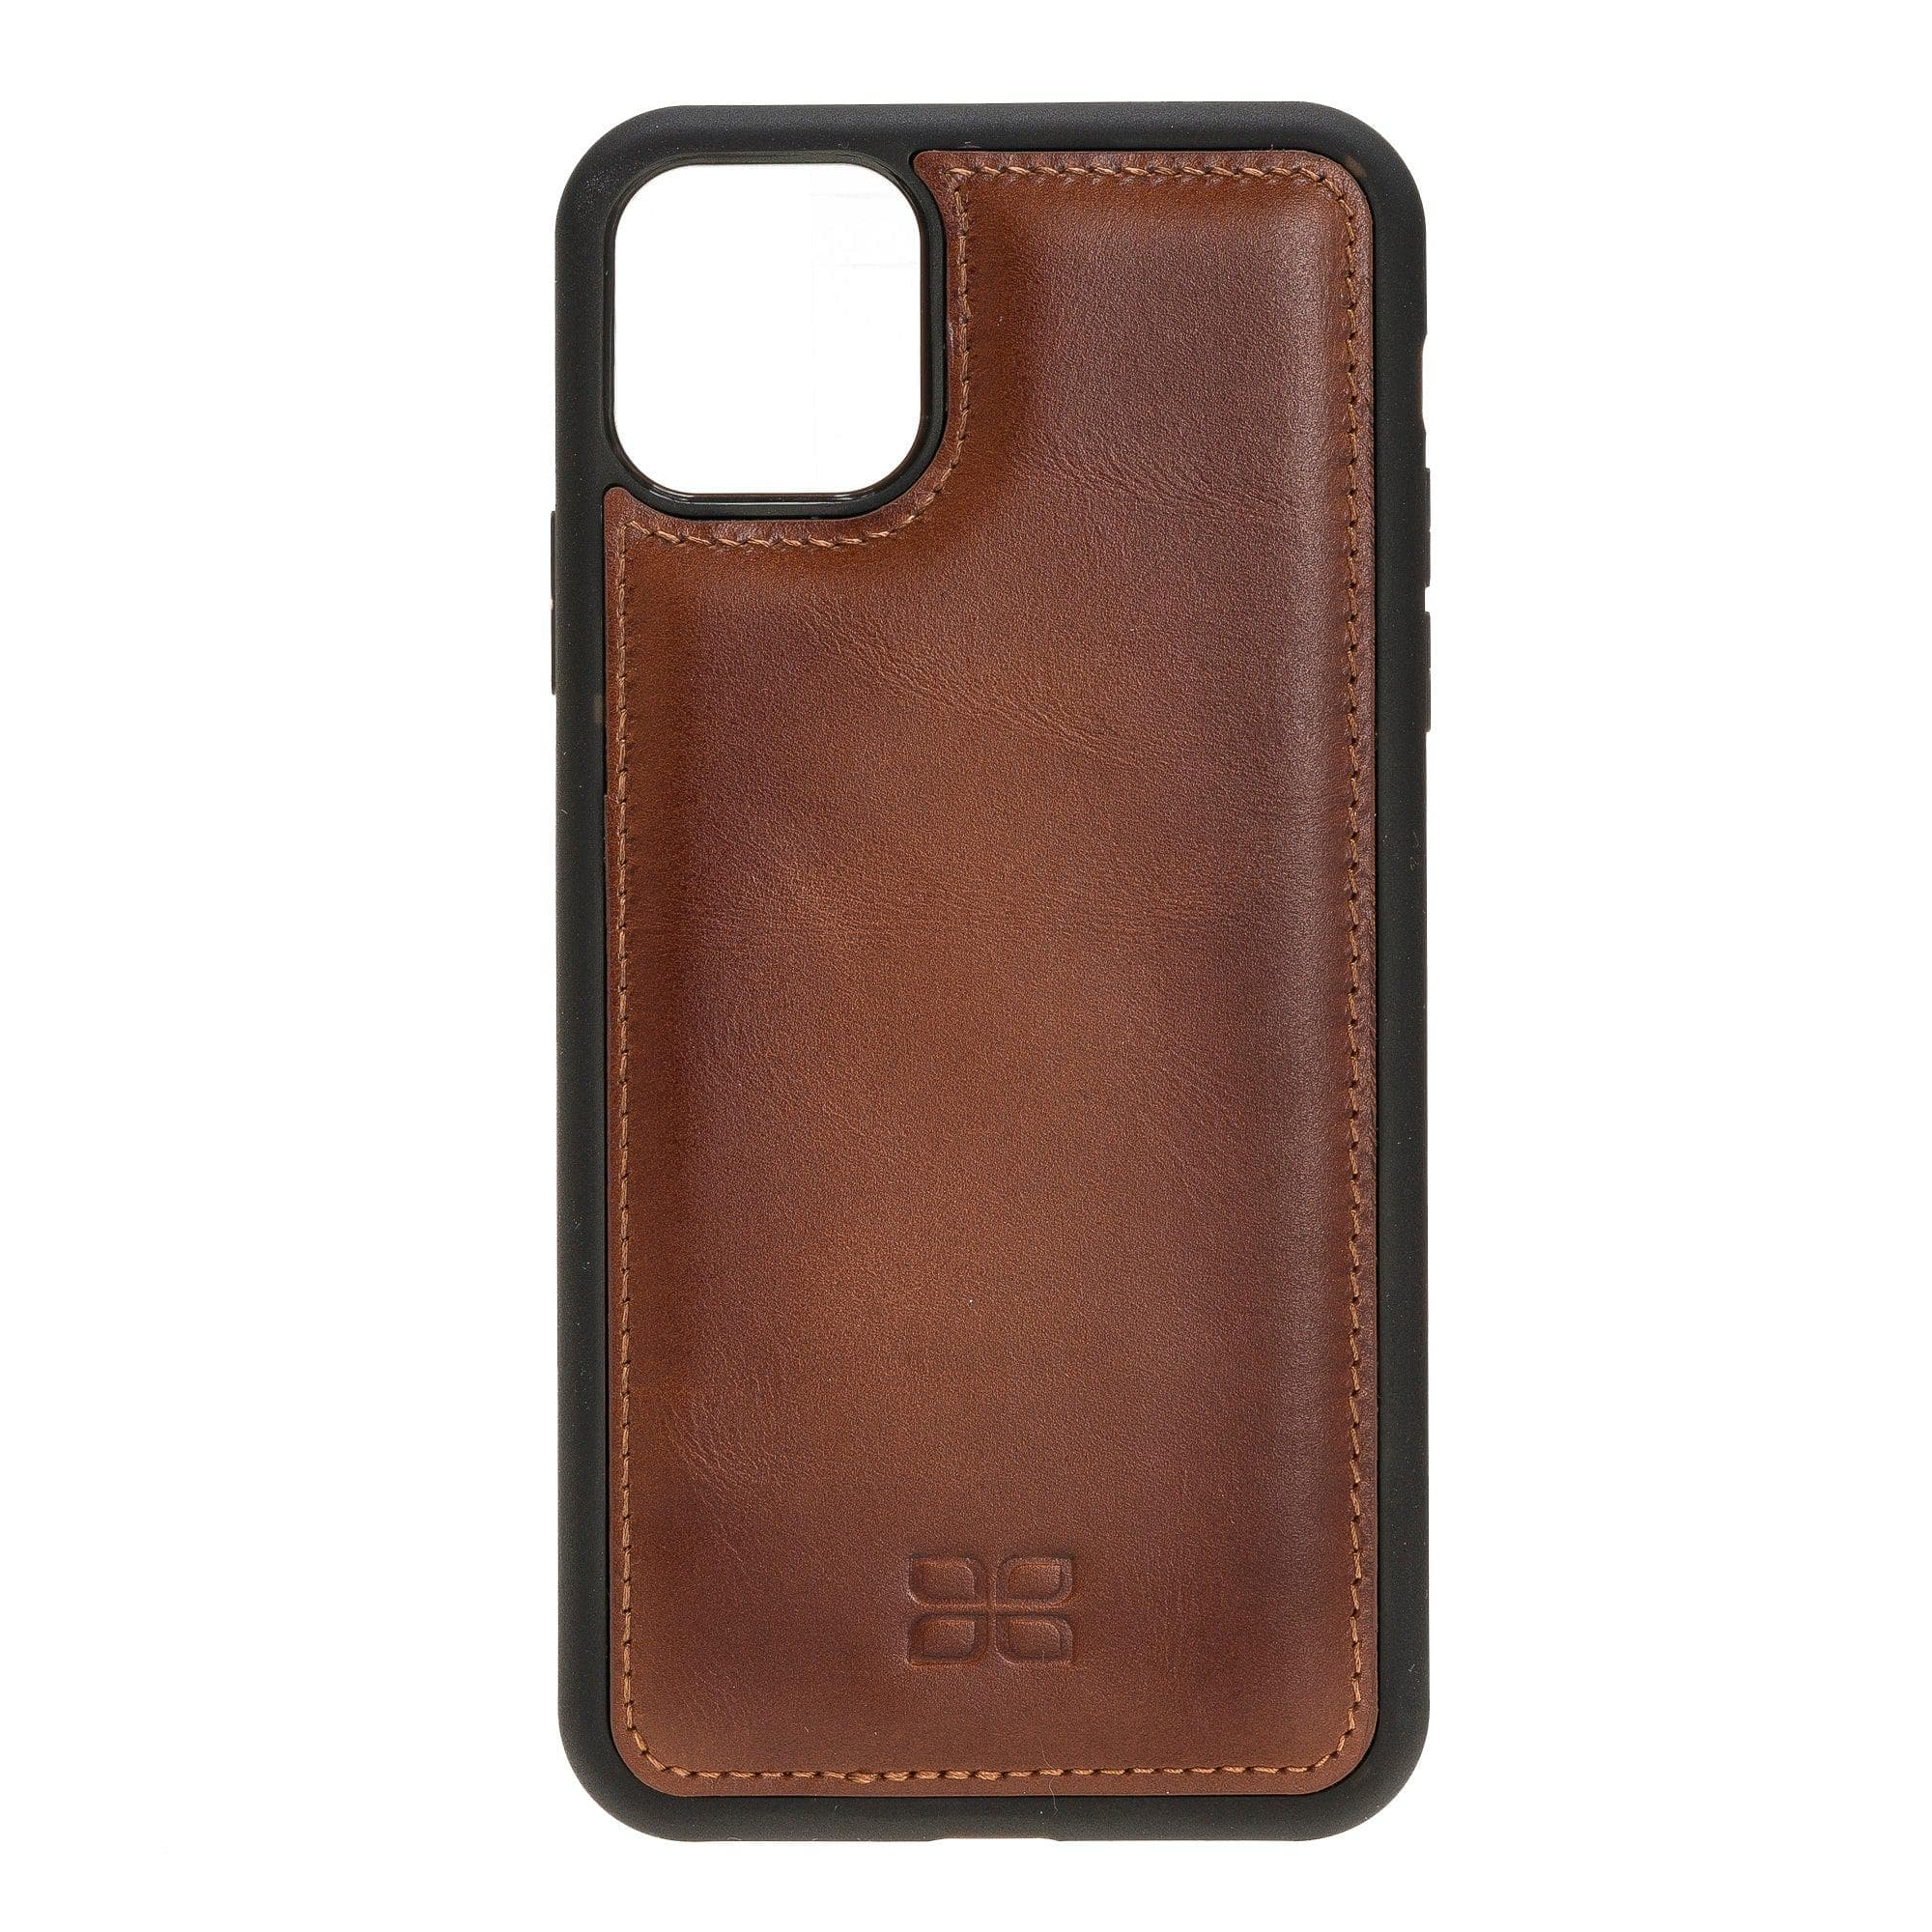 Flex Cover Leather Back Cover Case for Apple iPhone 11 Series iPhone 11 Promax 6.5" / Tan Bouletta LTD